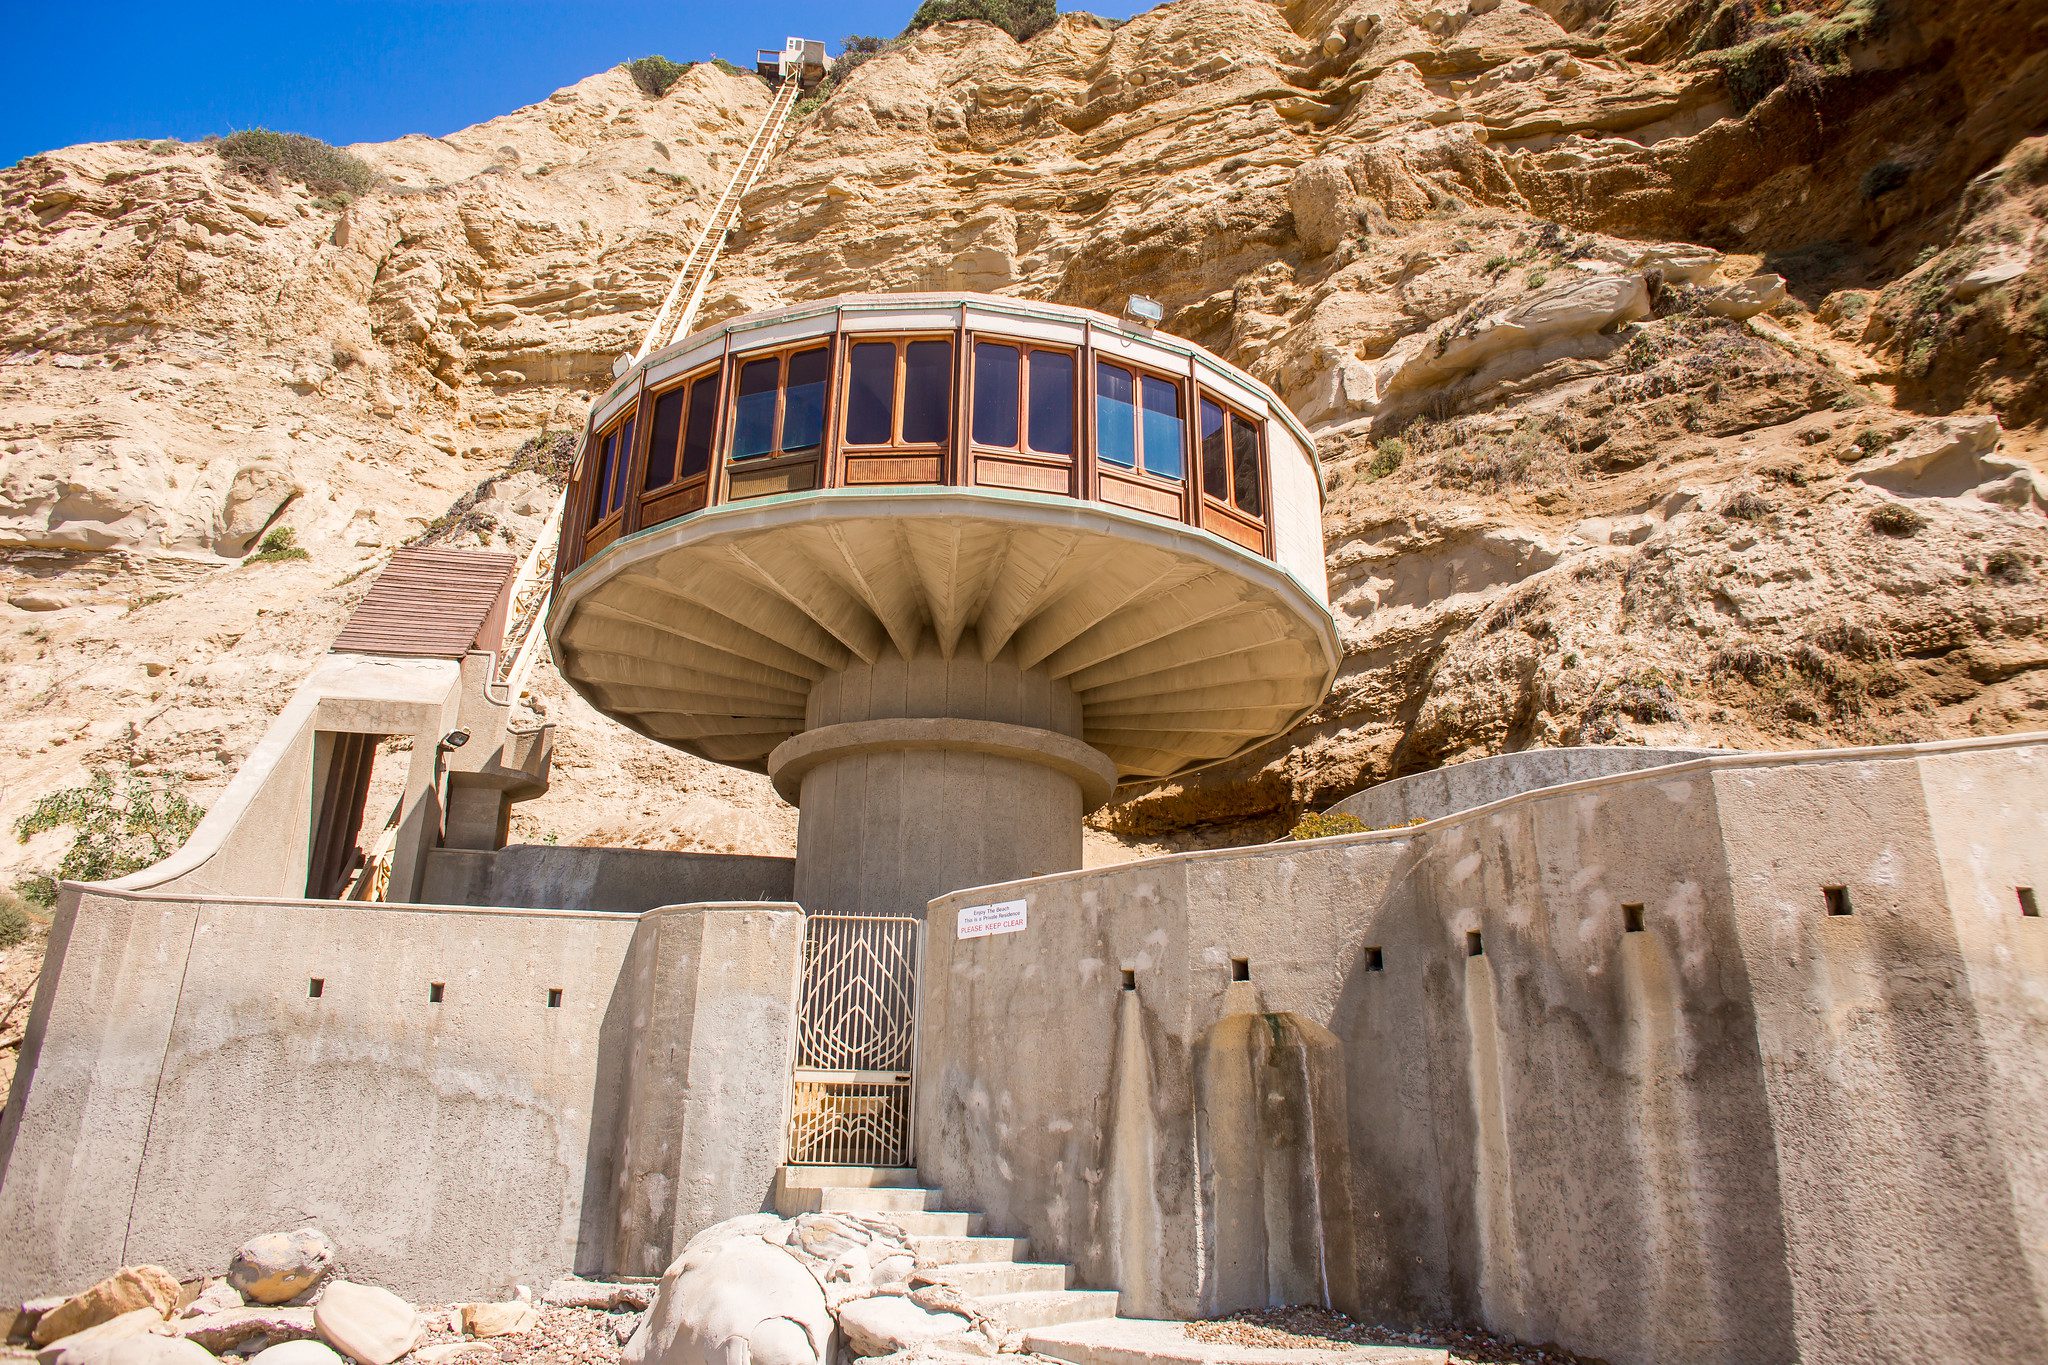 front view of mushroom house circular concrete structure surrounded by concrete walls and 300 foot tram going up the cliff